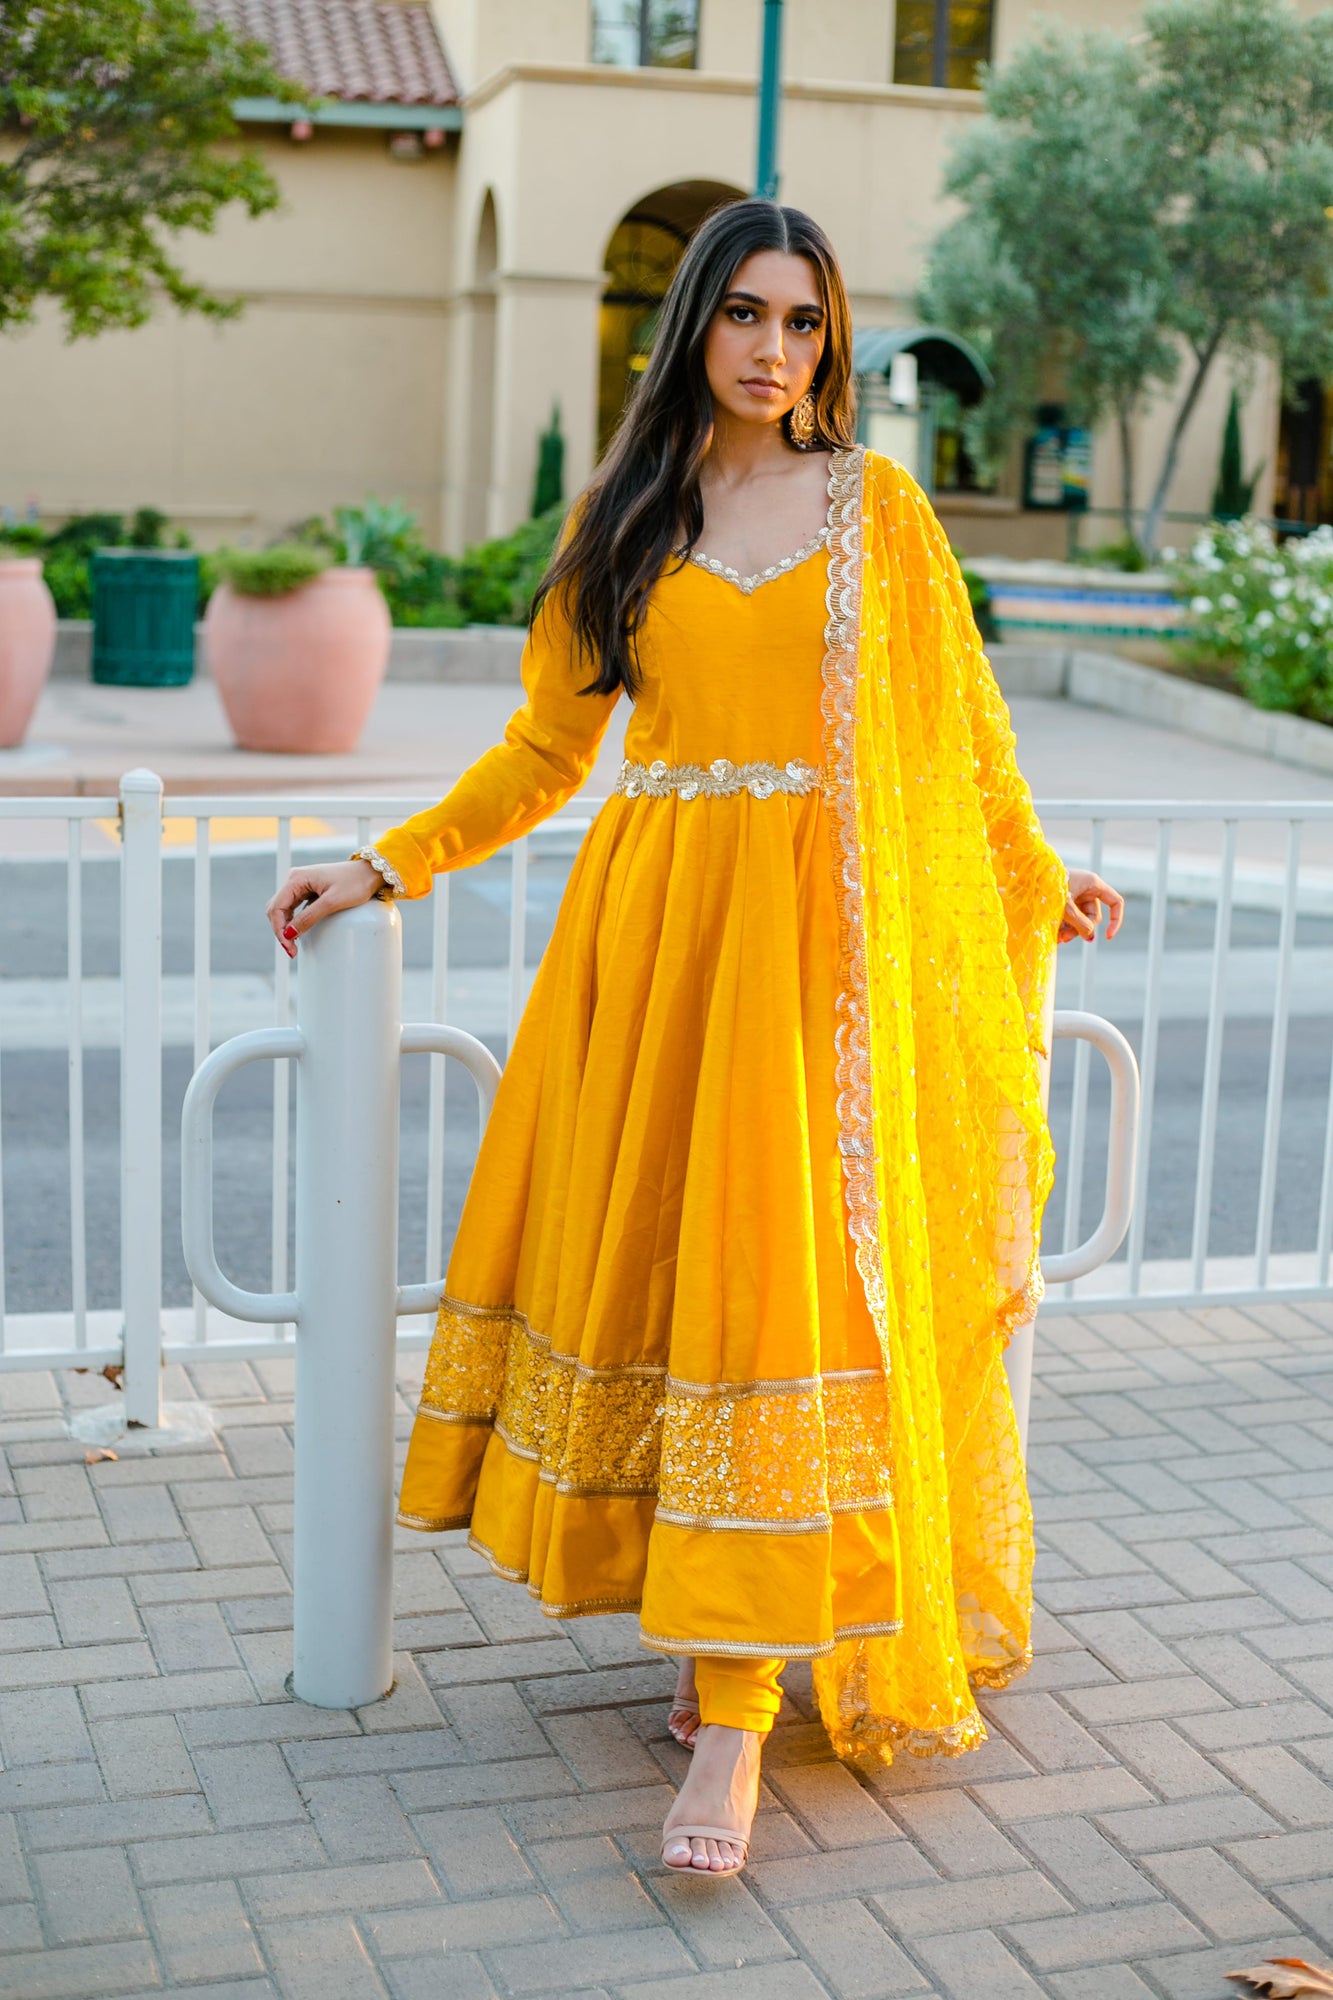 Anarkali Ki Bf - What to wear to a wedding while pregnant: Party Outfit Ideas â€“ B Anu Designs